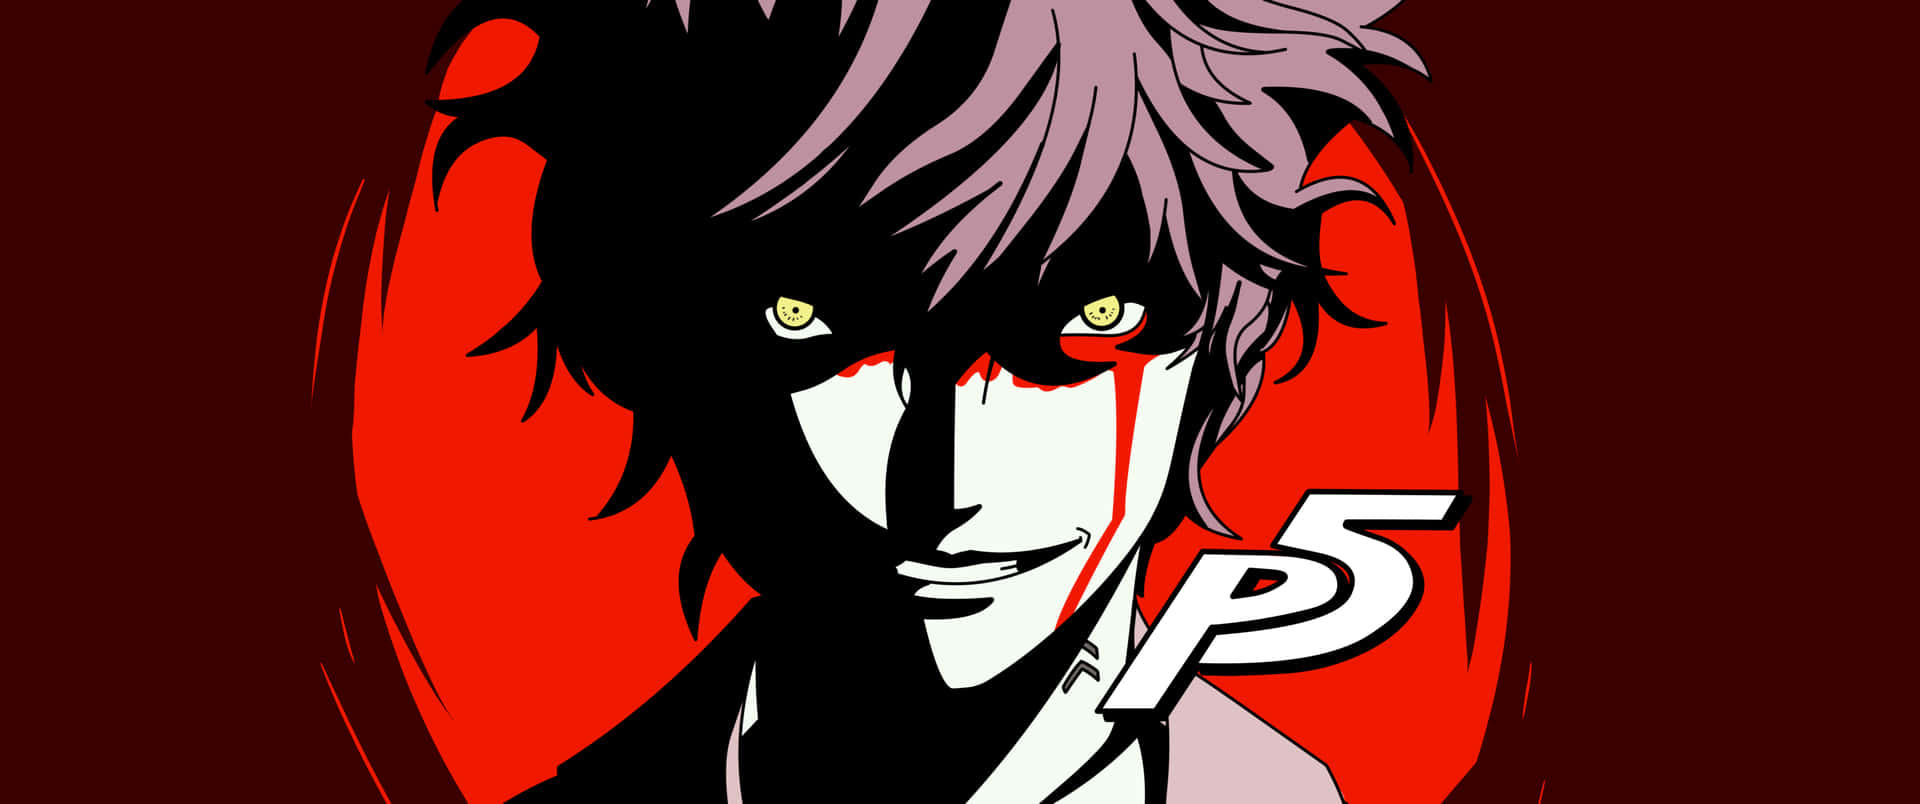 A Logo for Persona 5, Everyone's #1 Game Wallpaper